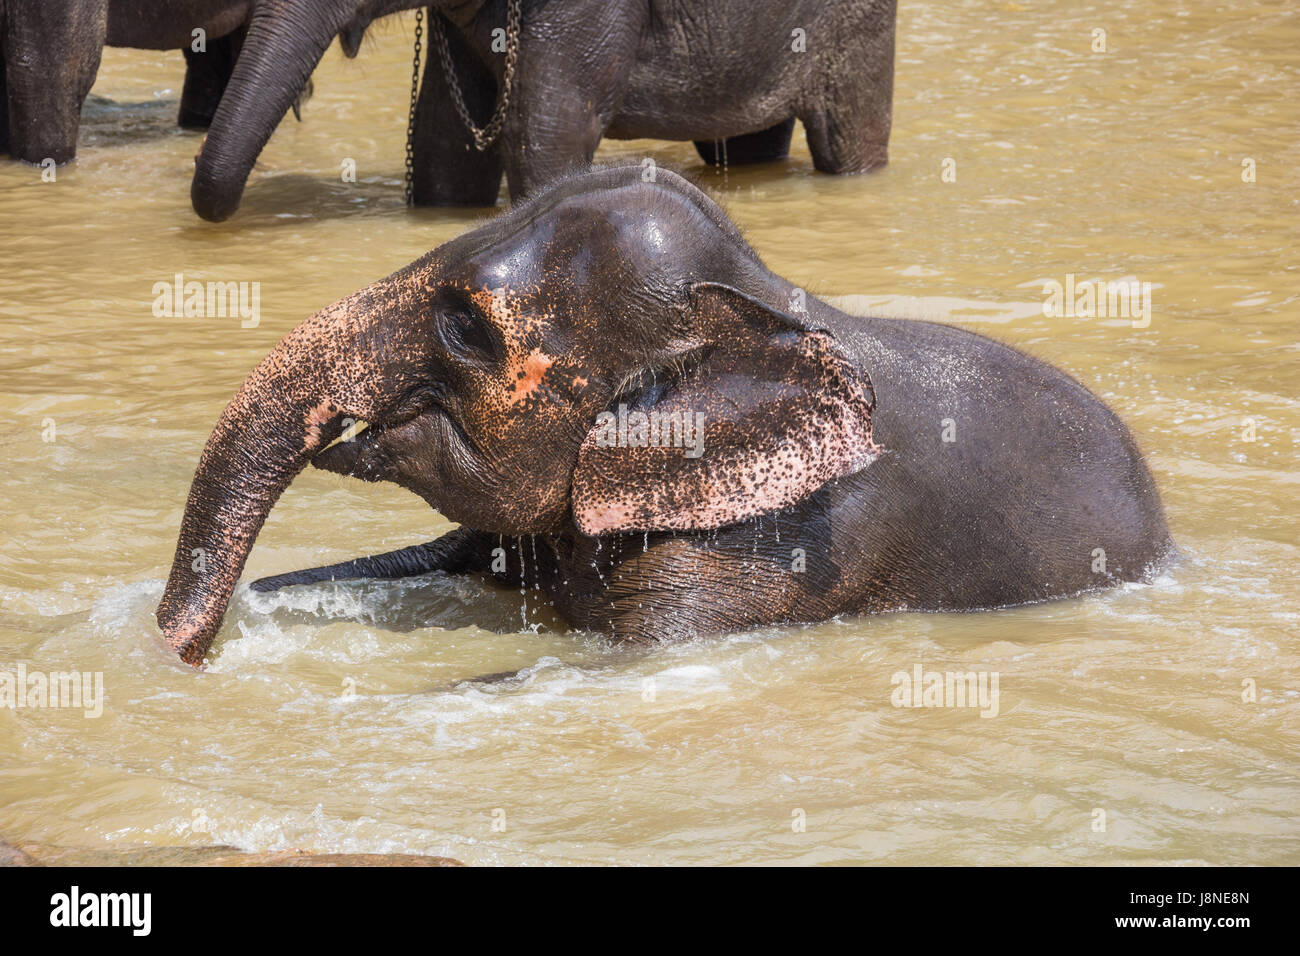 Elephant emerging from the water. Selective focus on the animal. Stock Photo